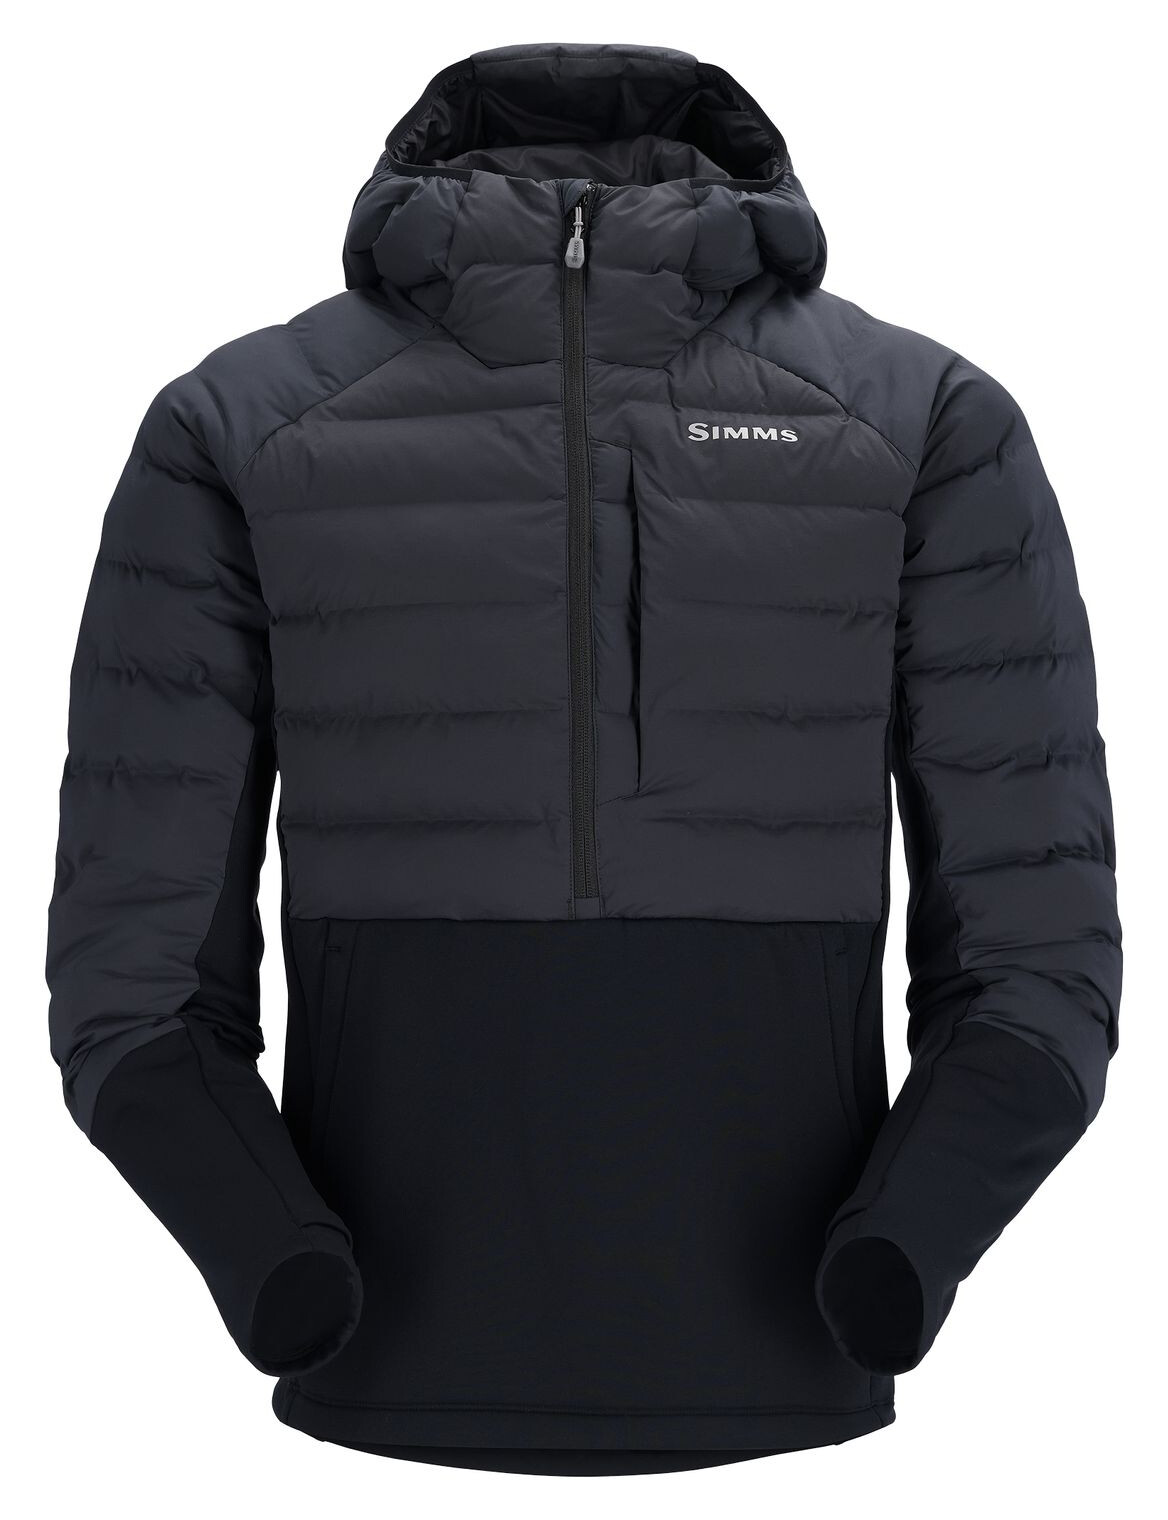 https://www.czechnymph.com/data/web/auto-imported-products/simms/simms-exstream-pull-over-hoody-db775d32.jpg